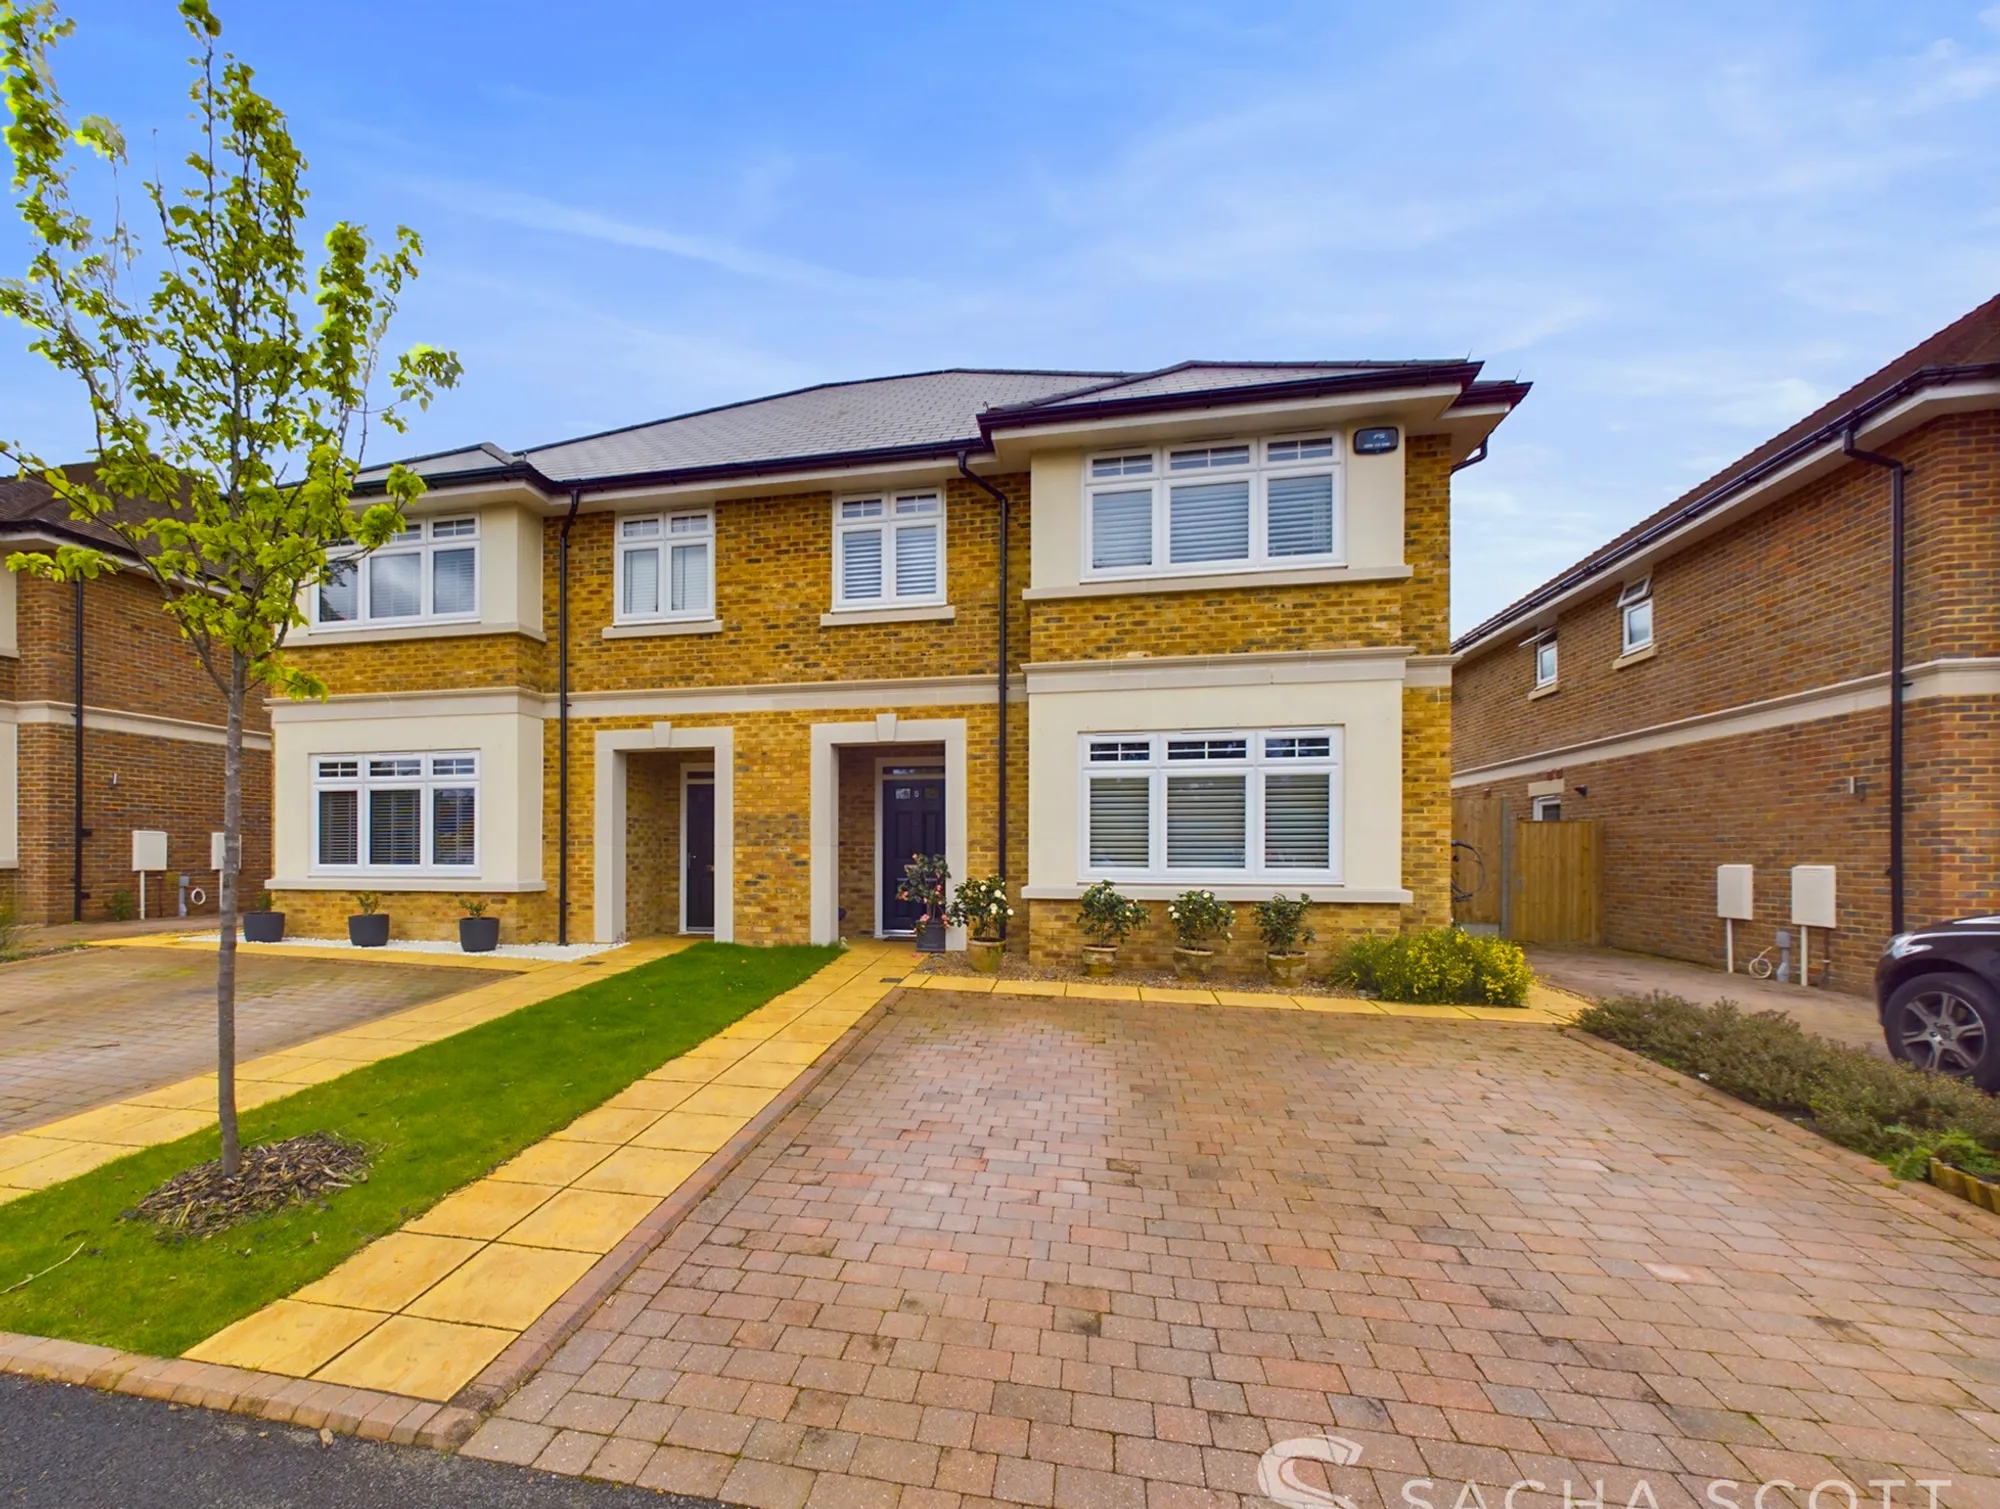 4 bed semi-detached house for sale in Kingfisher Close, Banstead  - Property Image 1